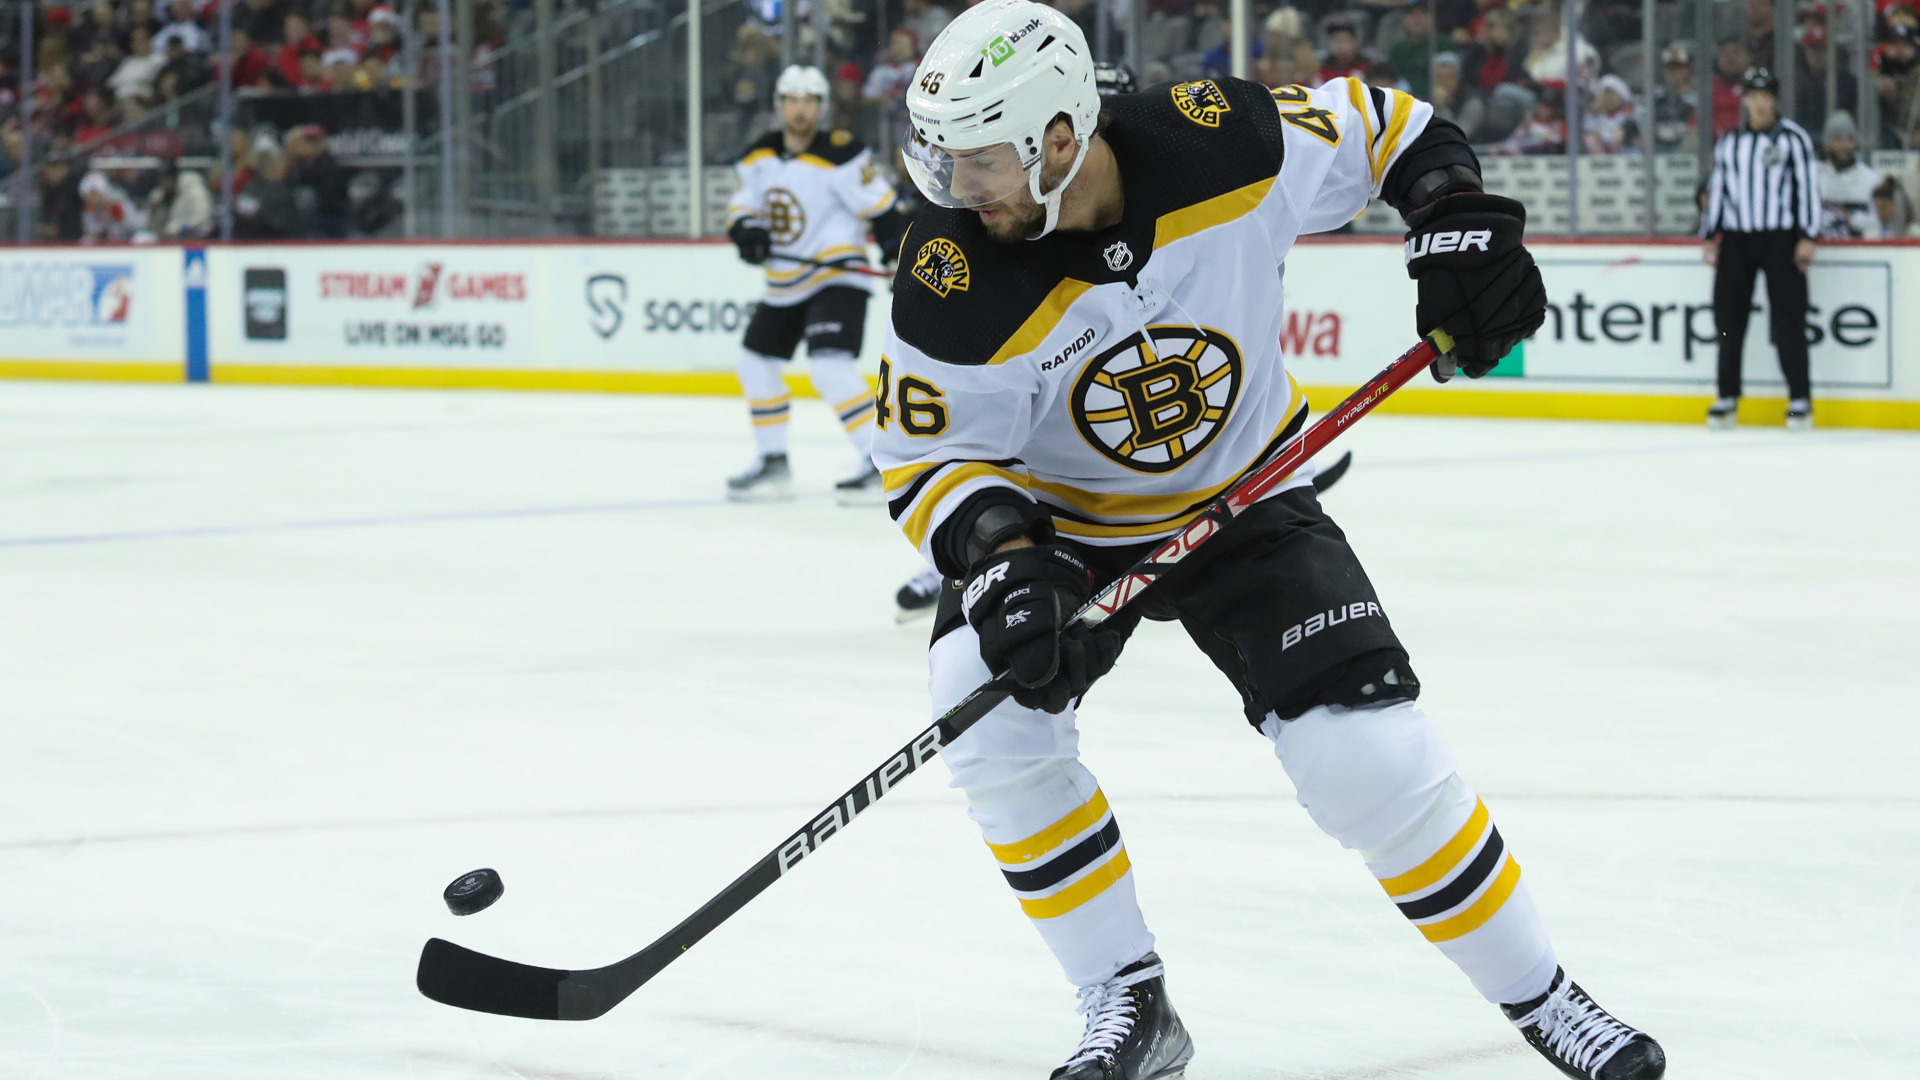 David Krejci to travel with Bruins to Florida ahead of Game 6